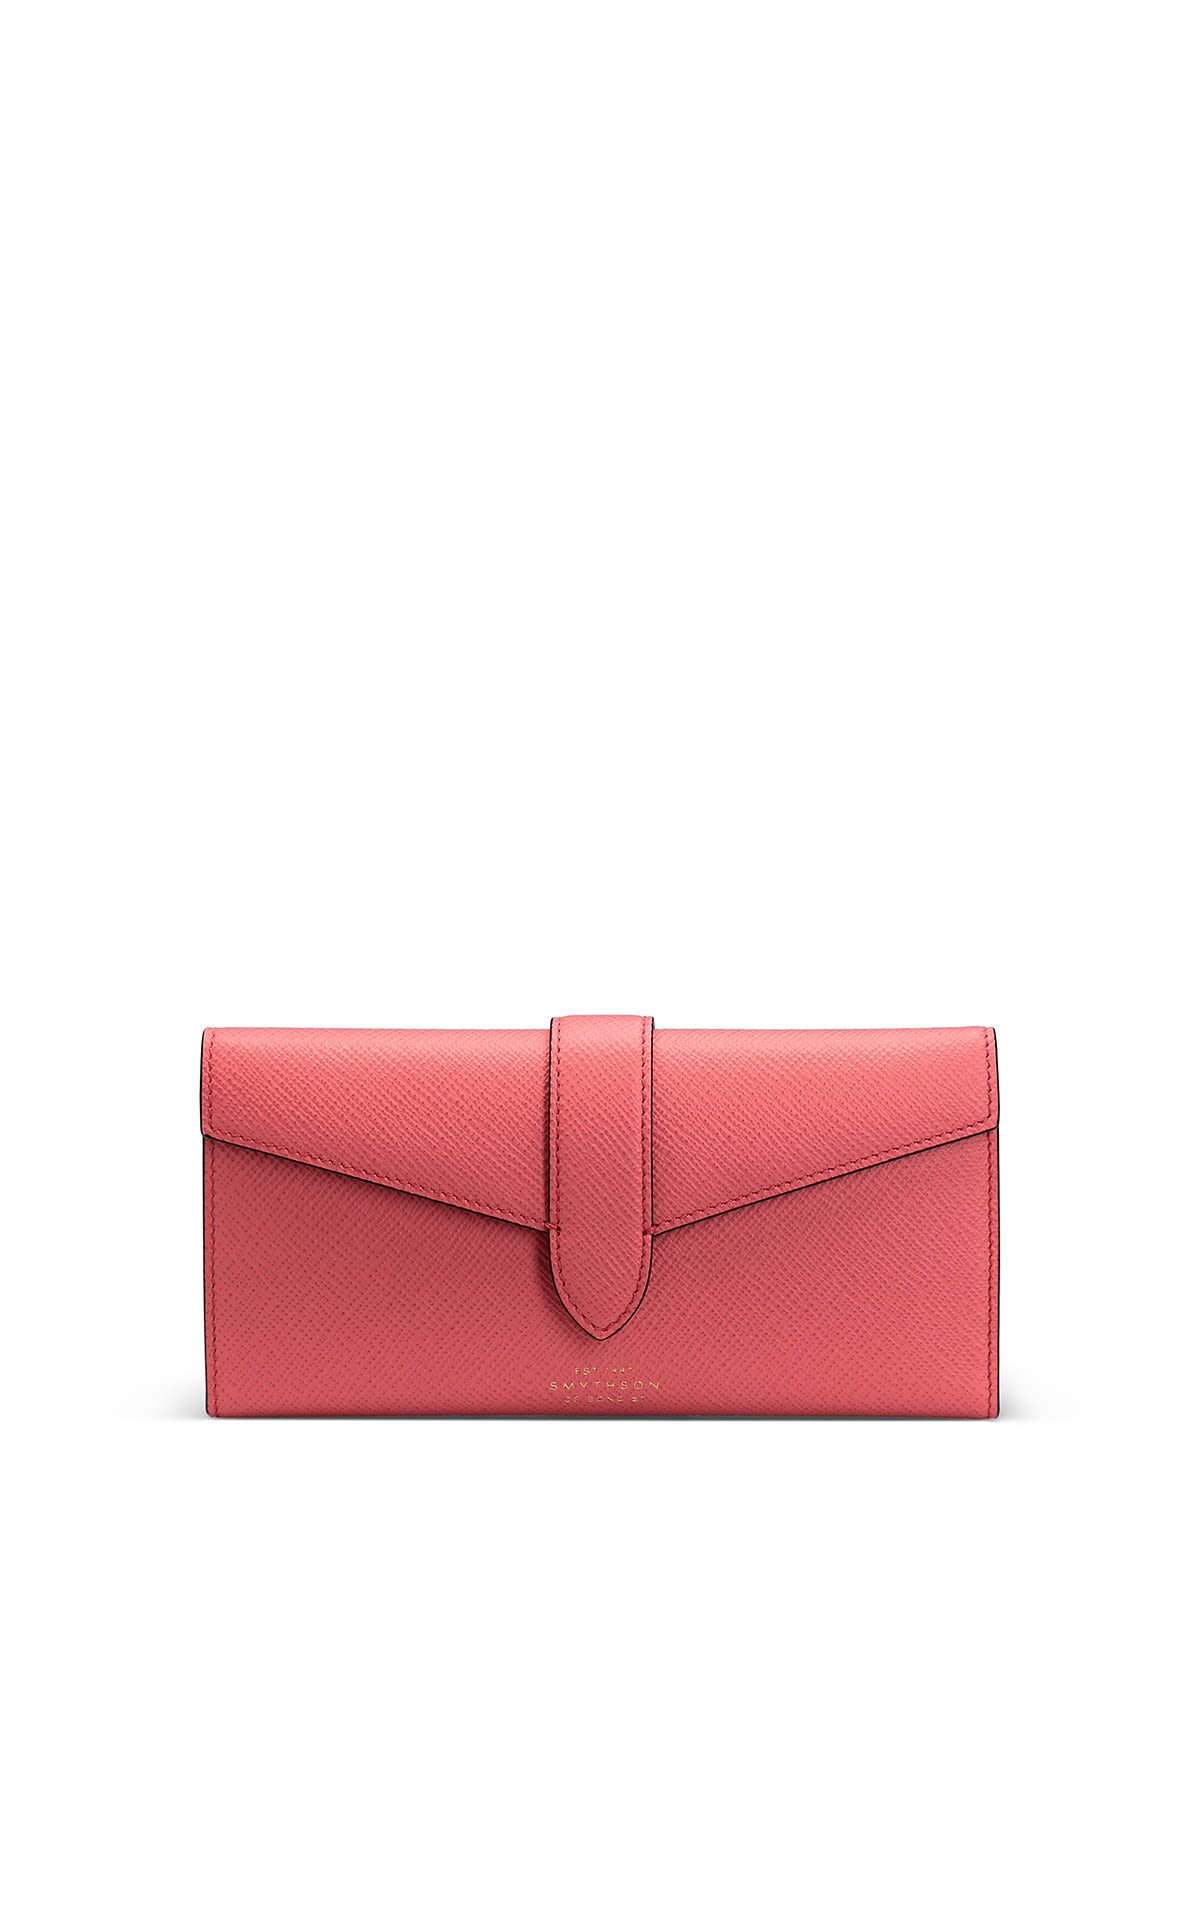 Smythson Panama trifold purse coral from Bicester Village